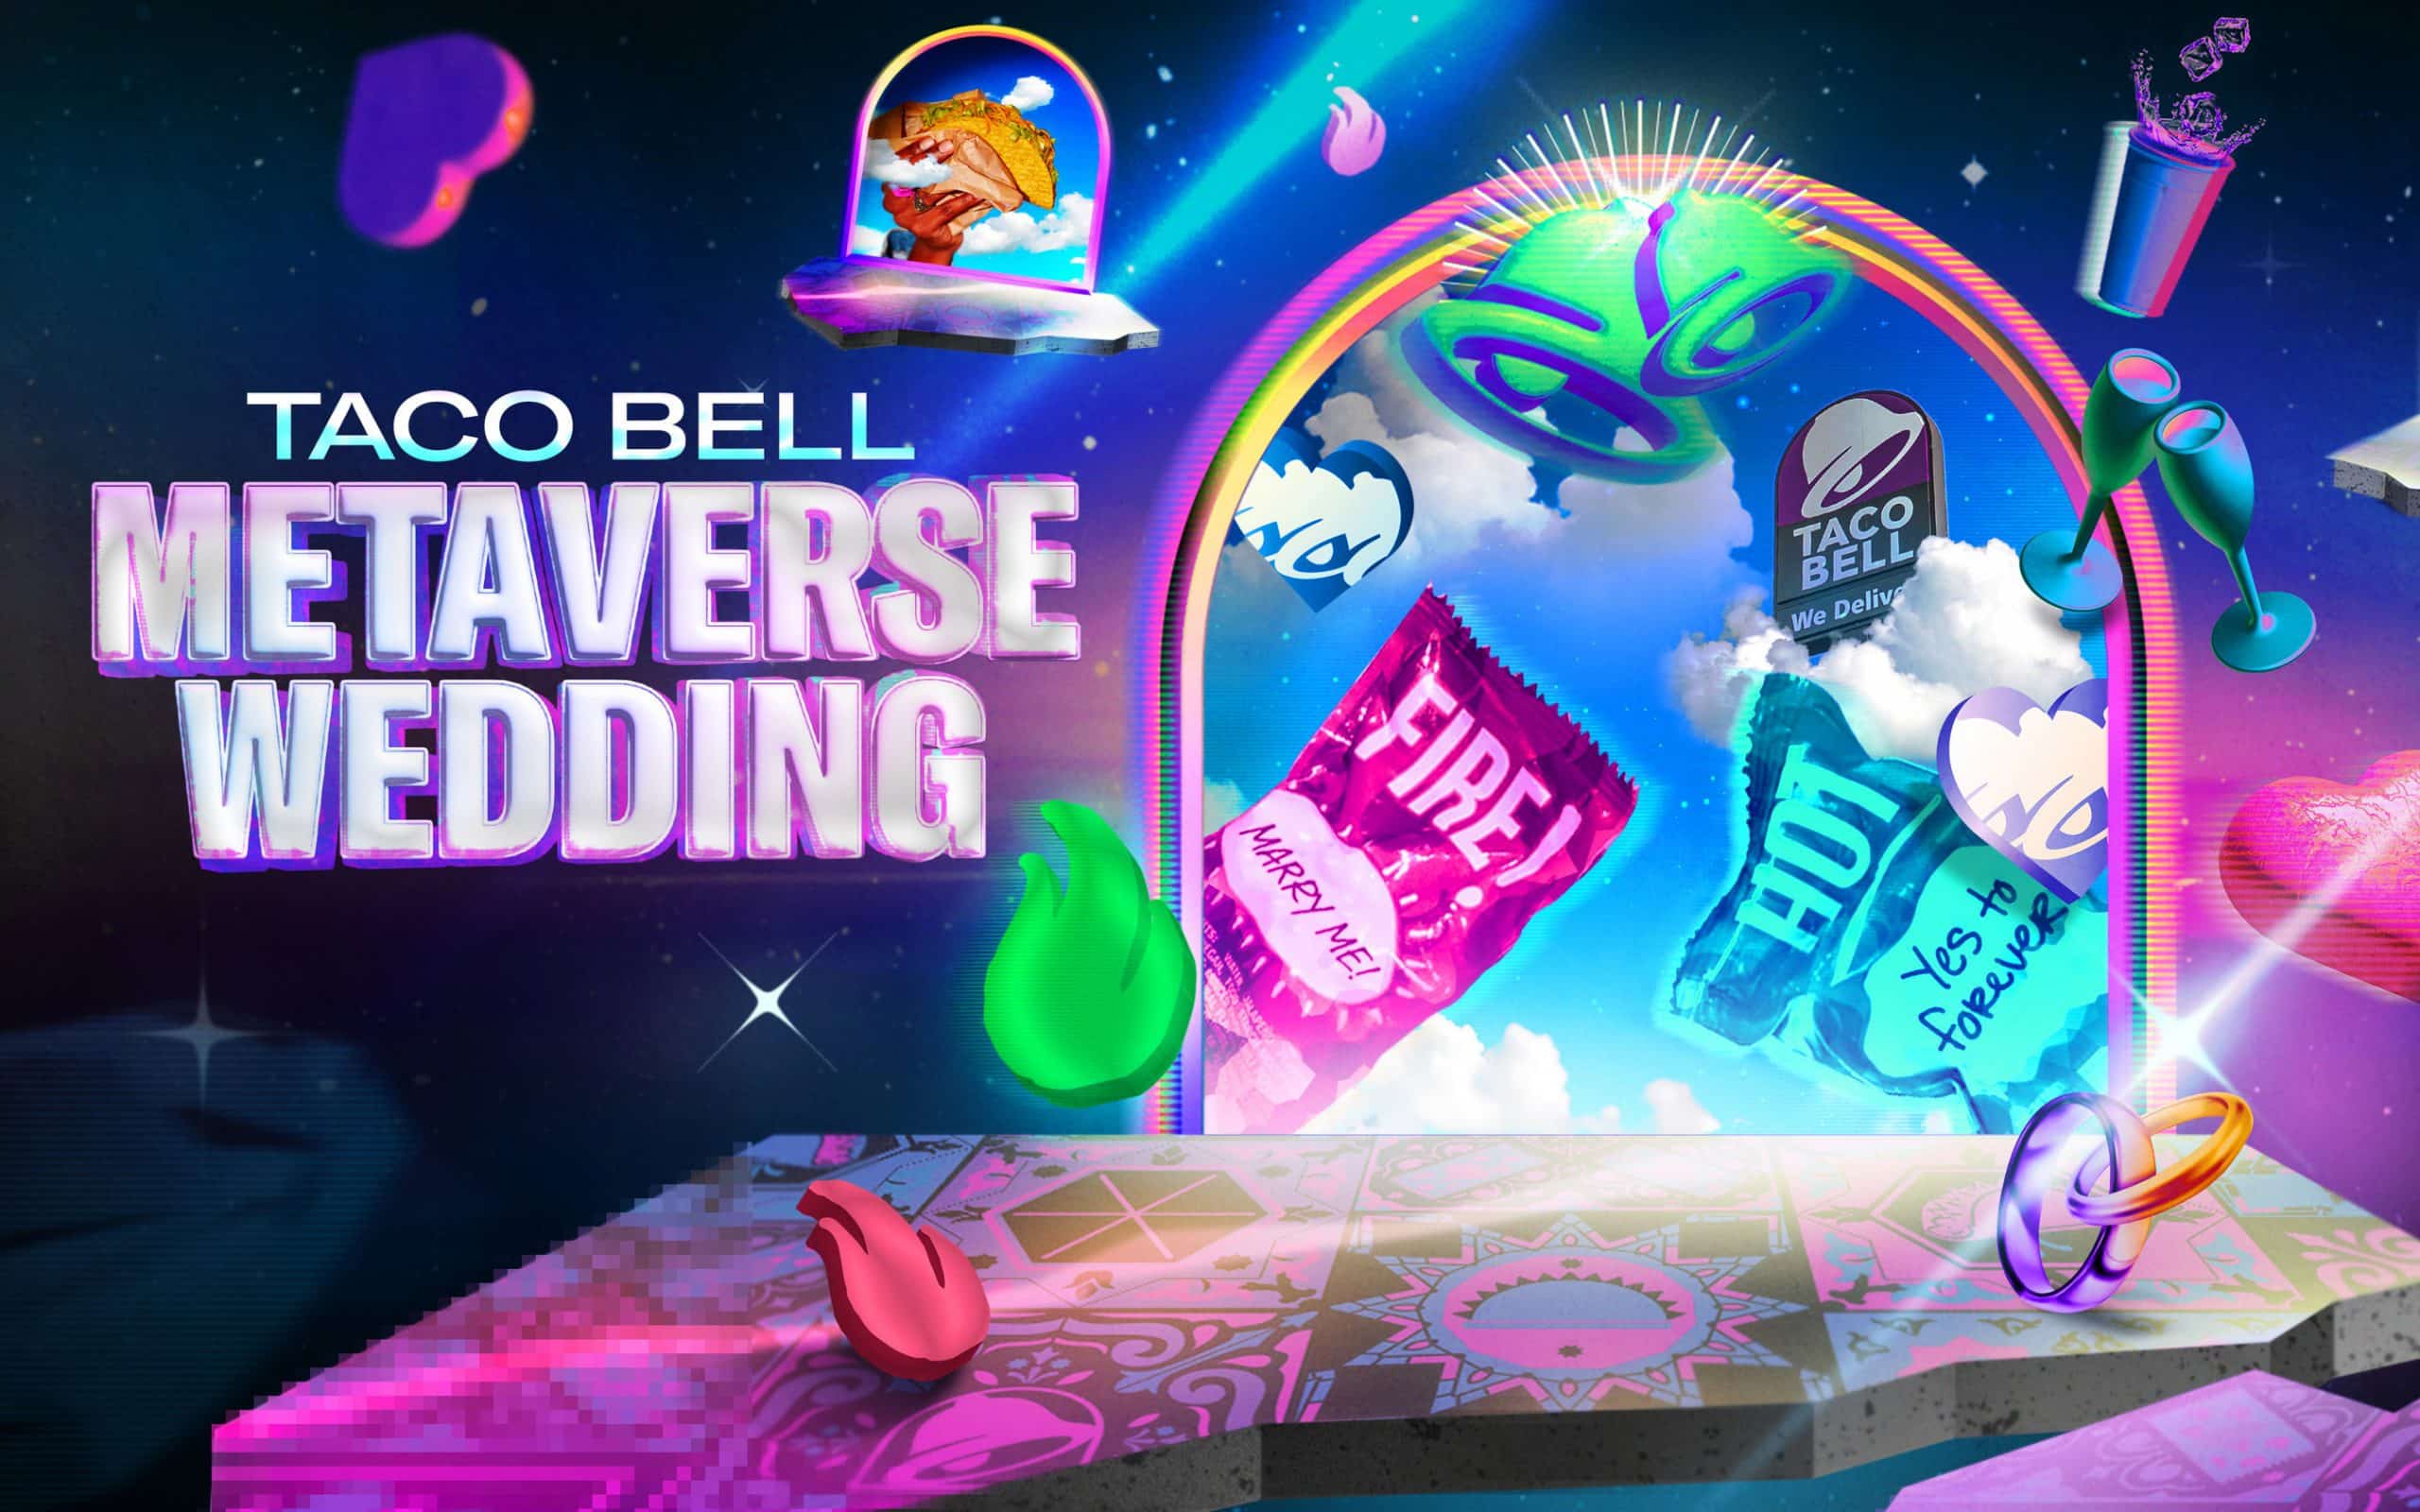 Taco Bell Metaverse Wedding poster showing a virtual stage with rings